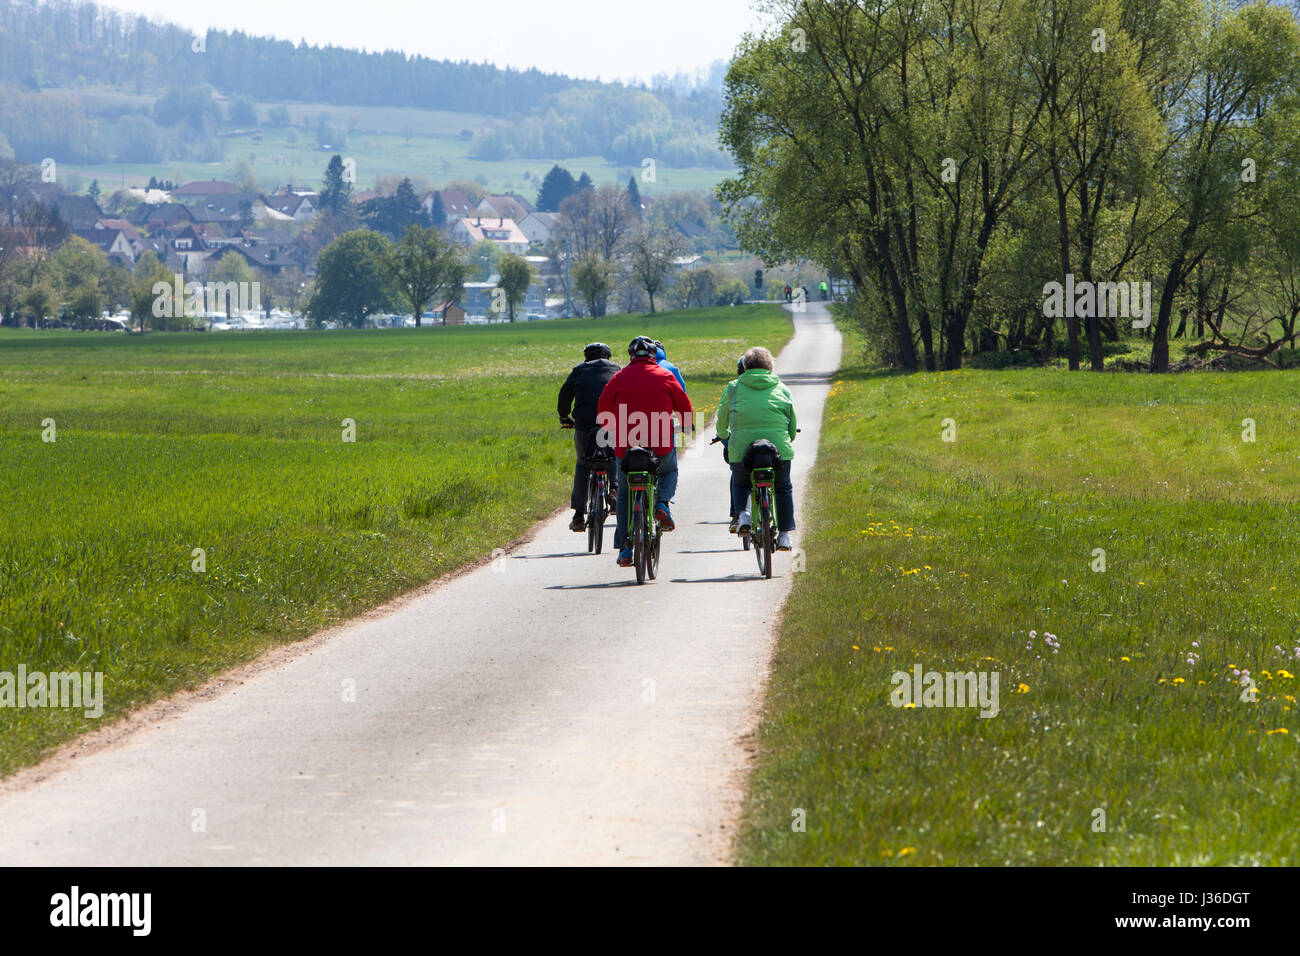 Il Weser bikeway R1 tra i villaggi di Gewissenruh e Gieselwerder, lungo il fiume Weser, Superiore Valle Weser, Weser Uplands, Weserbergland, R Foto Stock